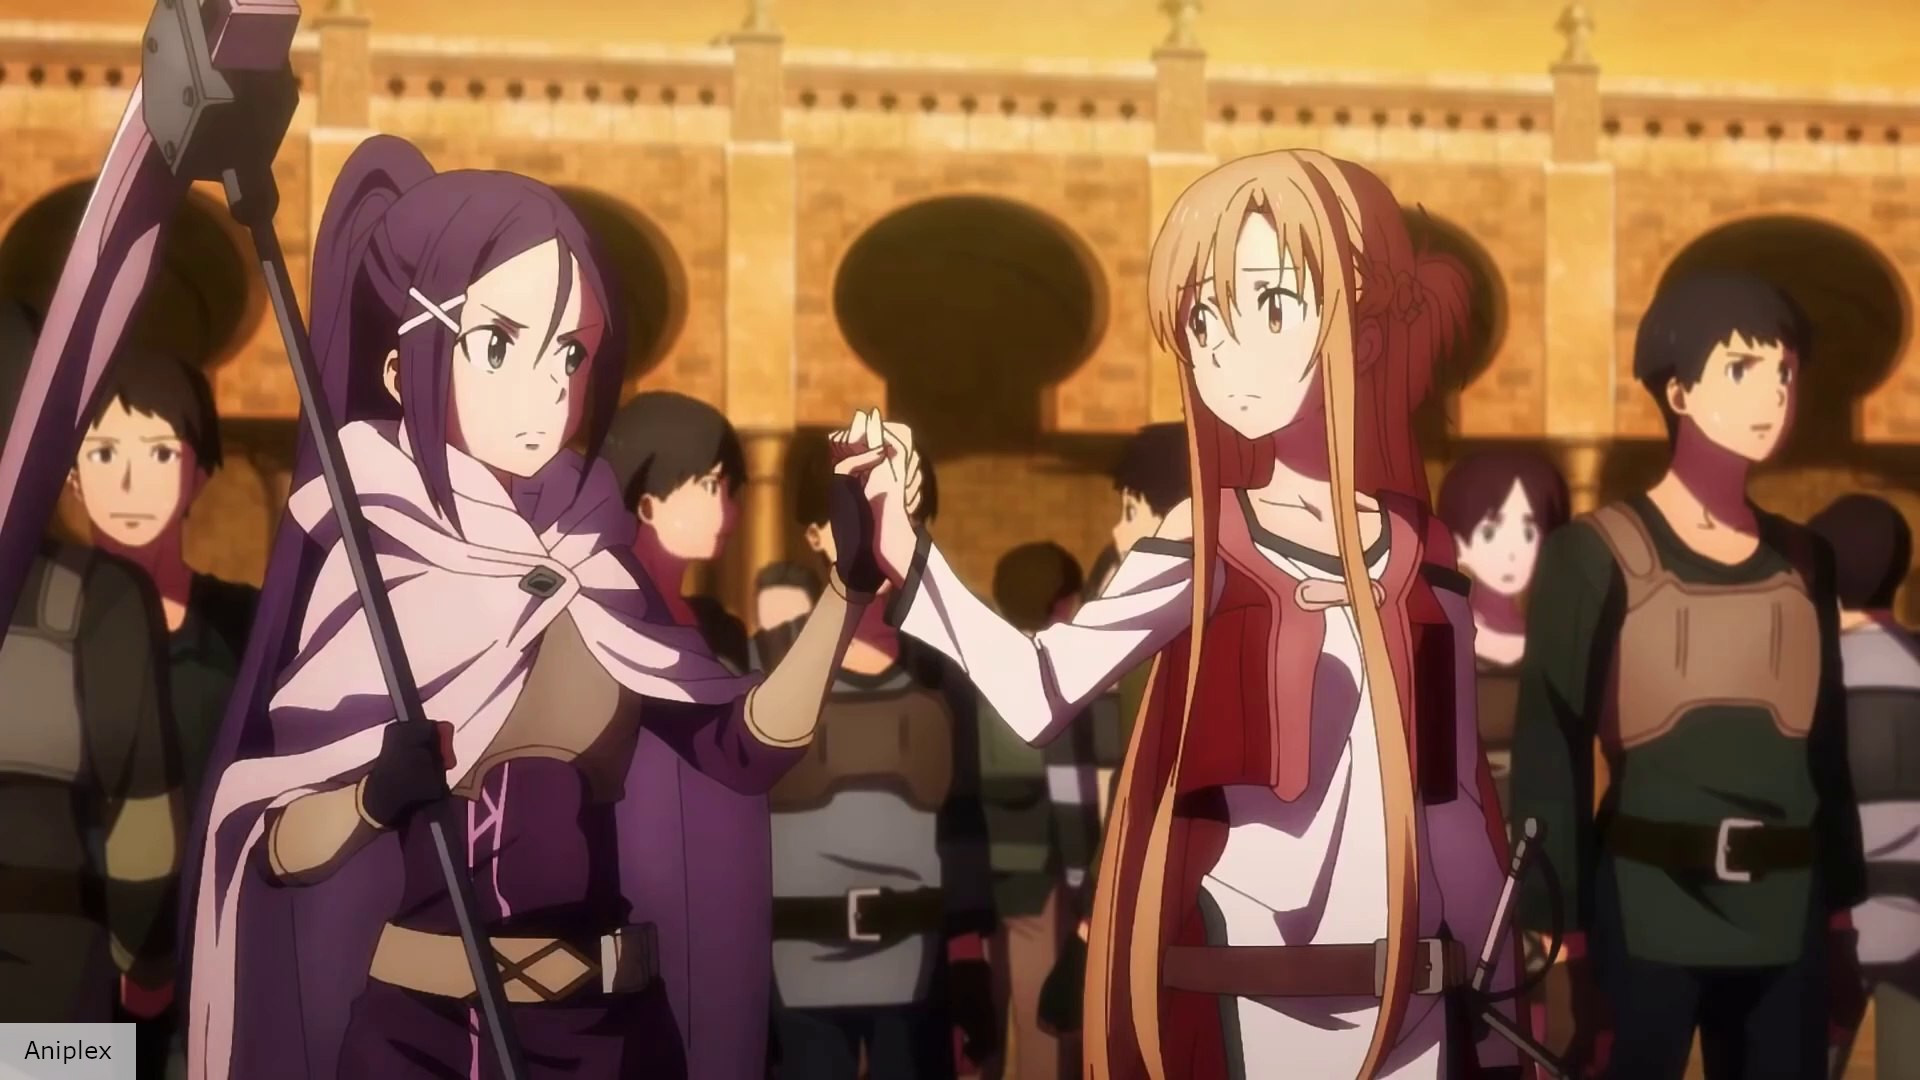 Sword Art Online: Progressive Movie Will Be Screened in Over 40 Countries,  New Trailer Released